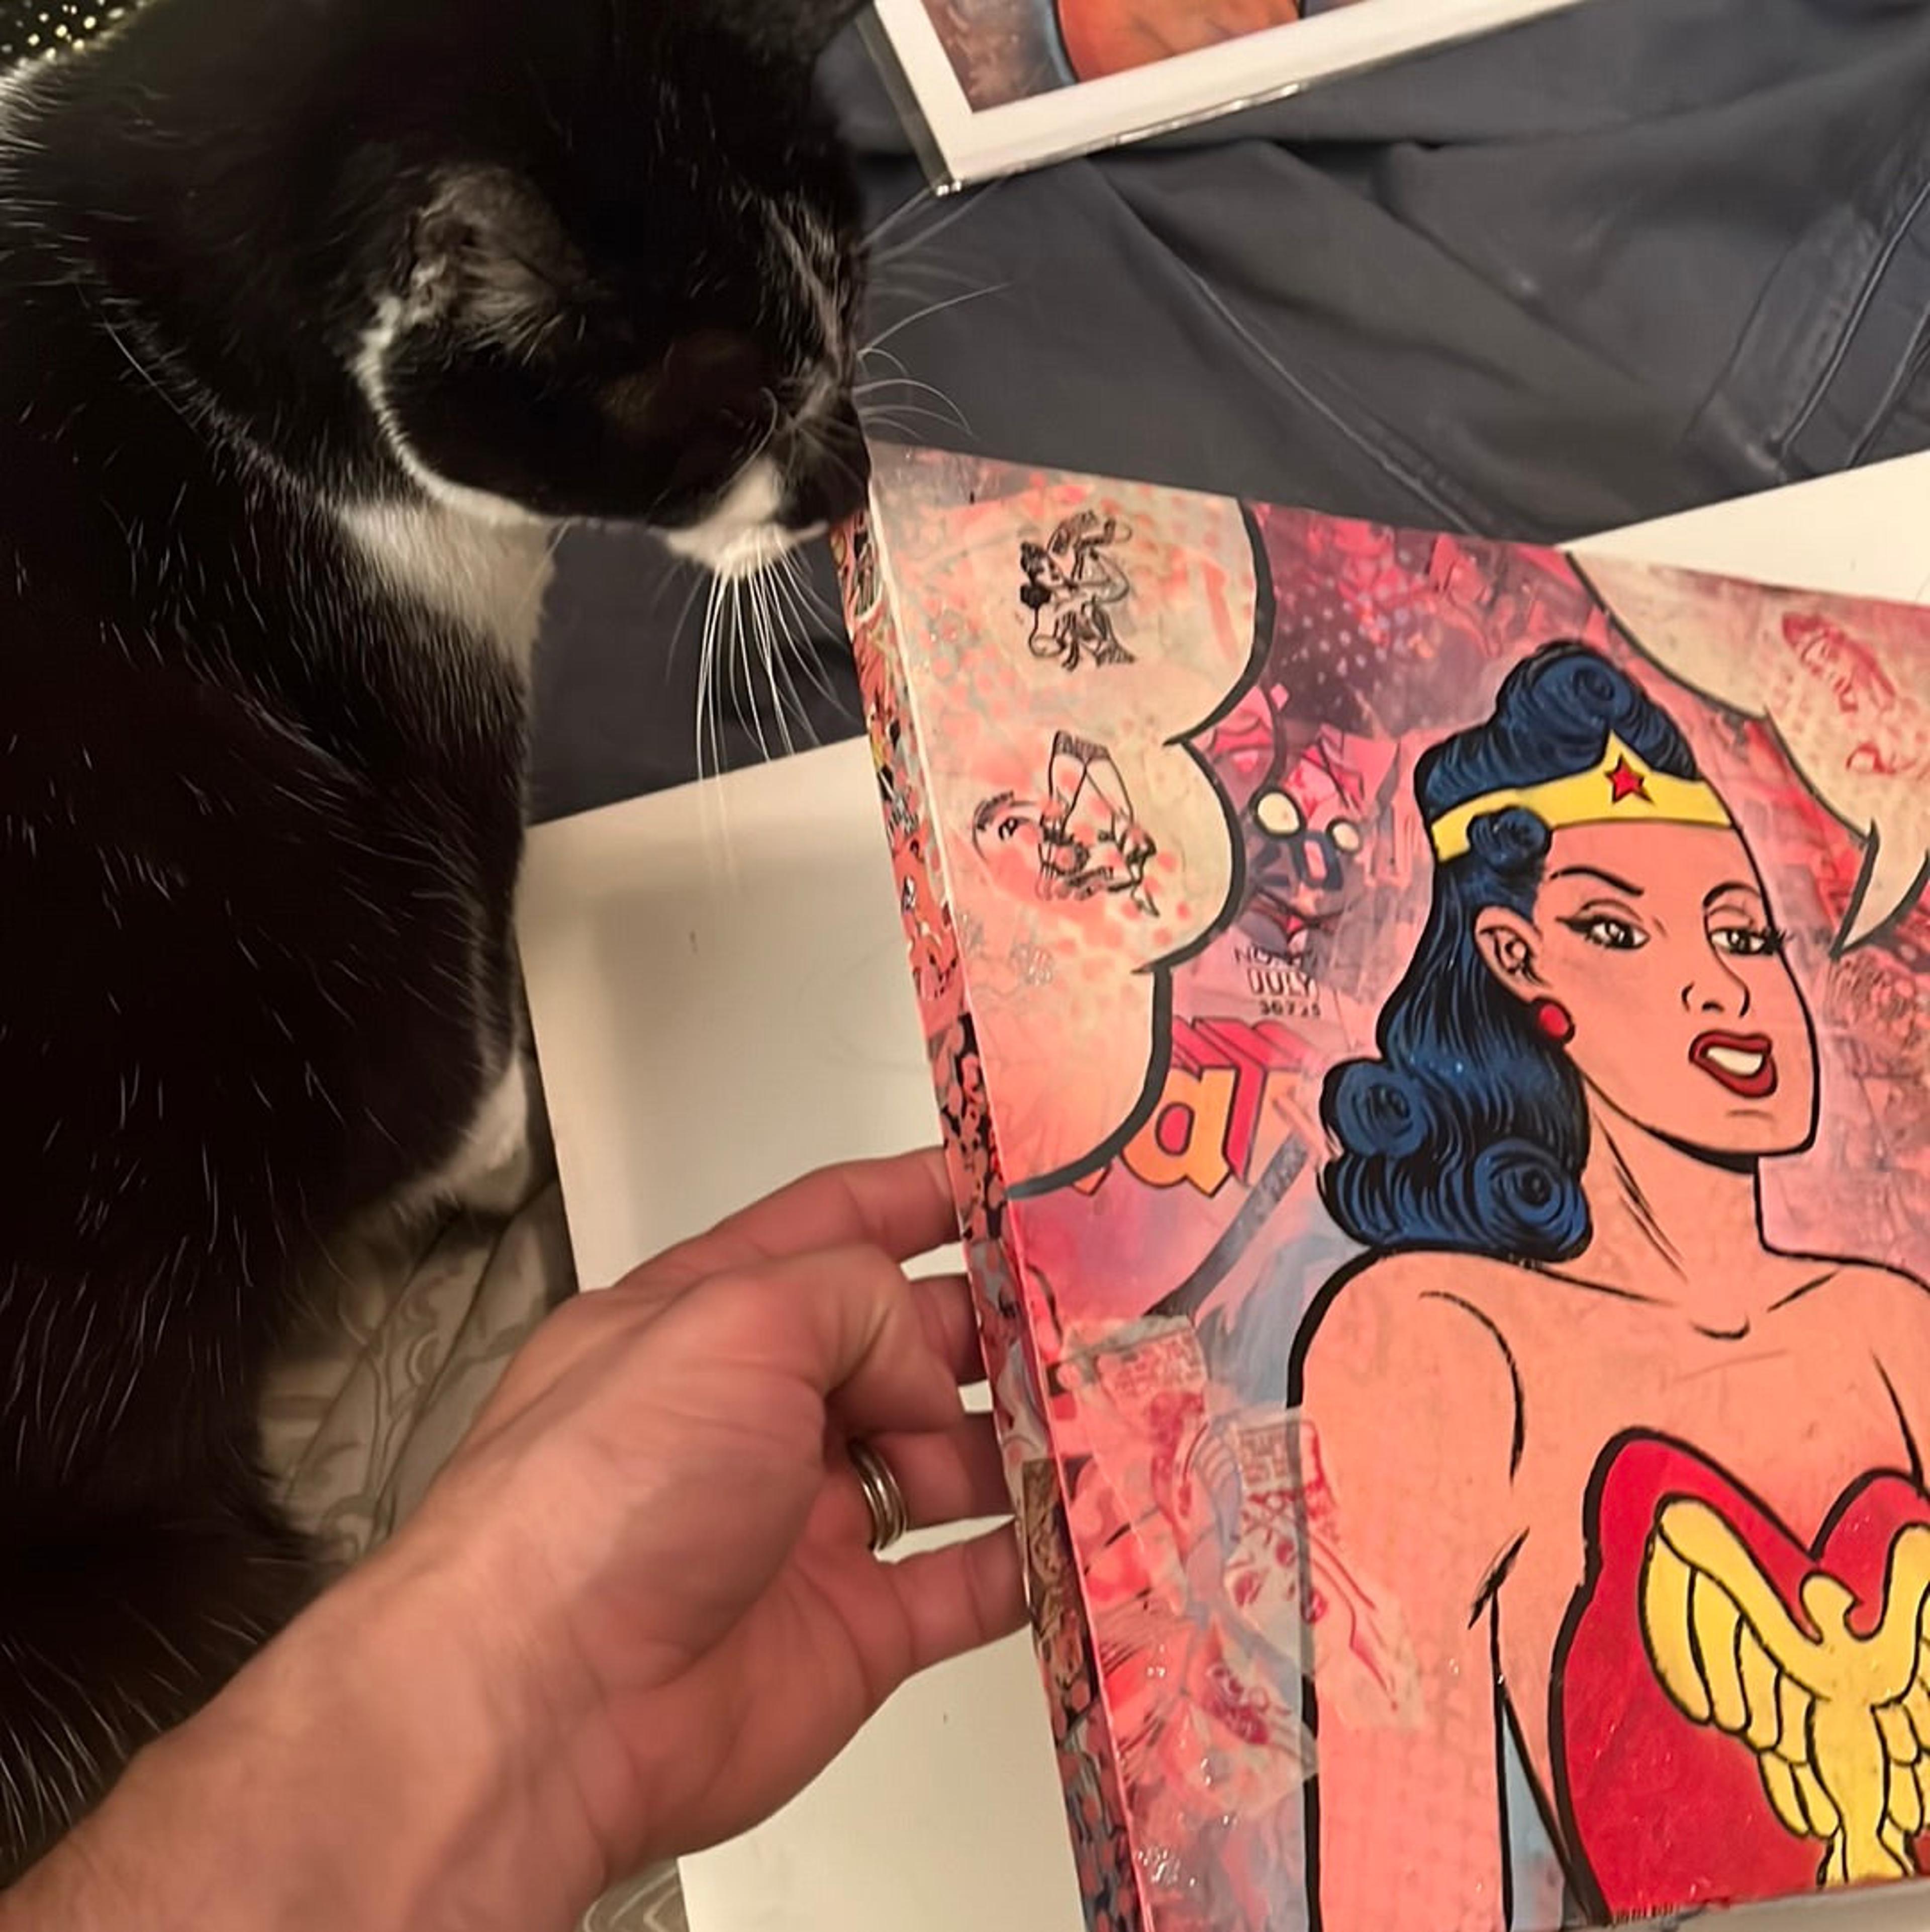 Alternate View 3 of "Wonder Woman Squared No. 1" original painting by Dr. Smash!  12